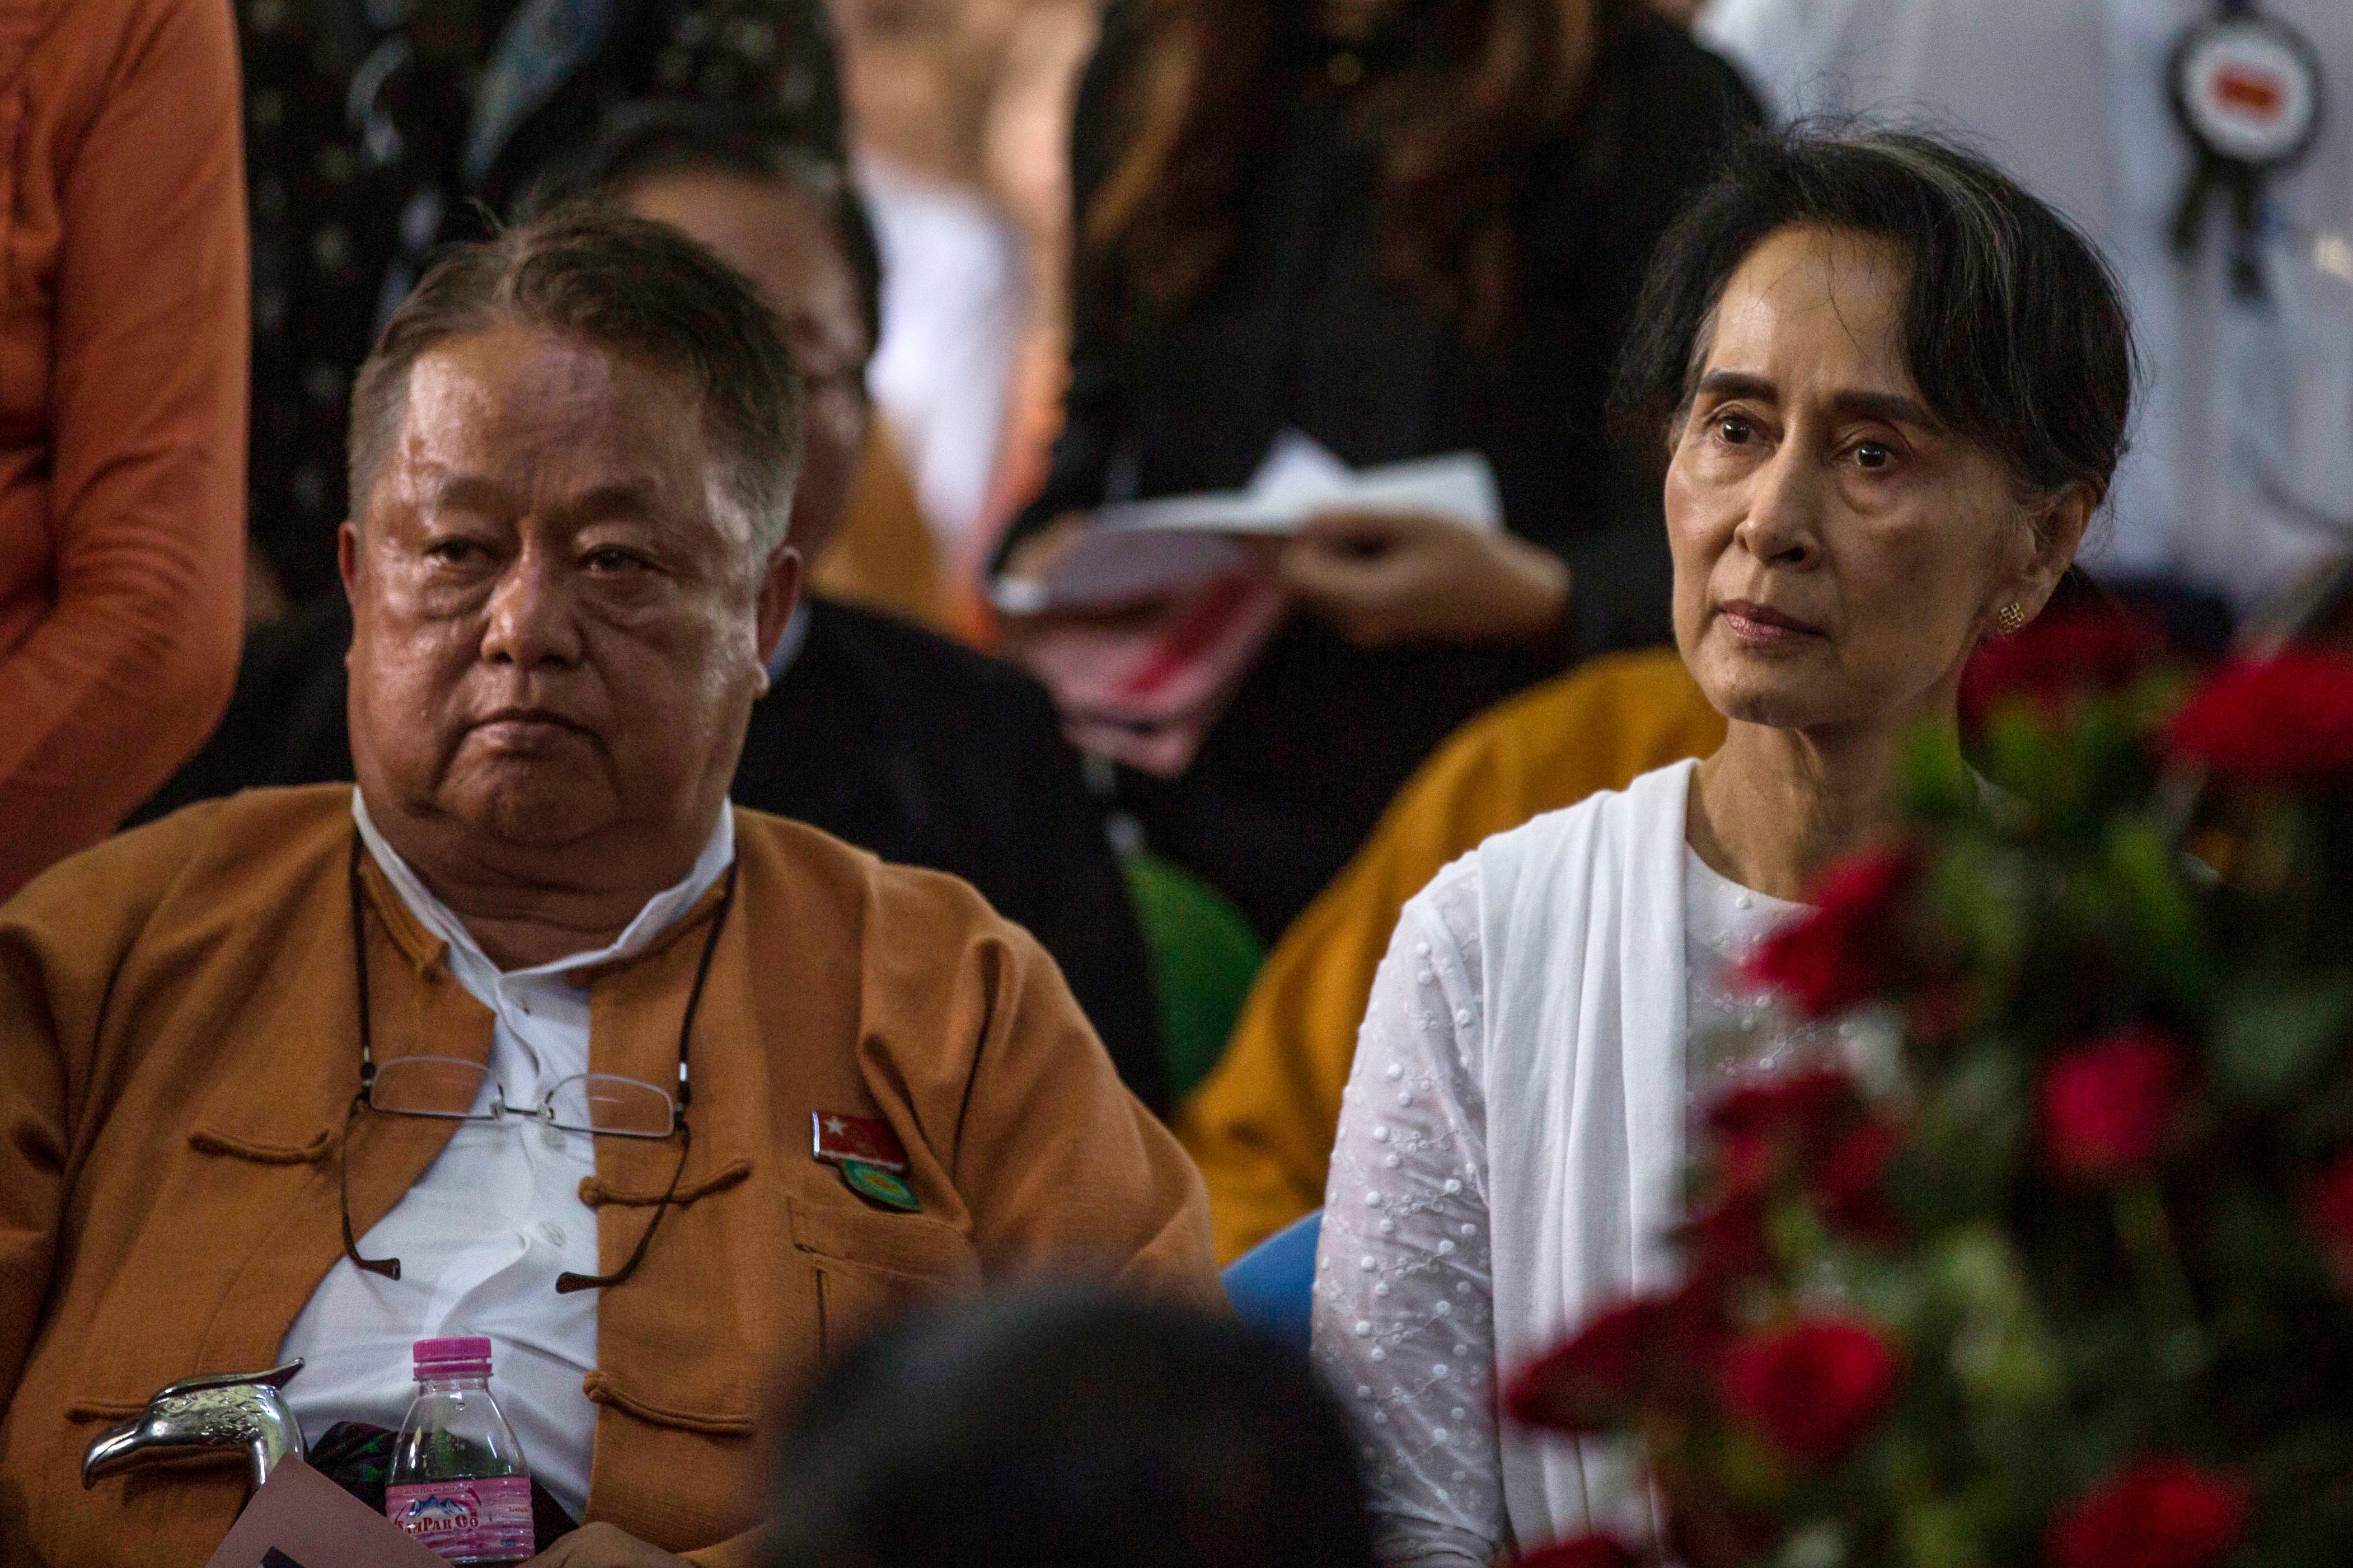 Aung San Suu Kyi and top aide Win Htein attend the funeral service of former NLD chairman Aung Shwe in Yangon. (PHOTO: AFP)